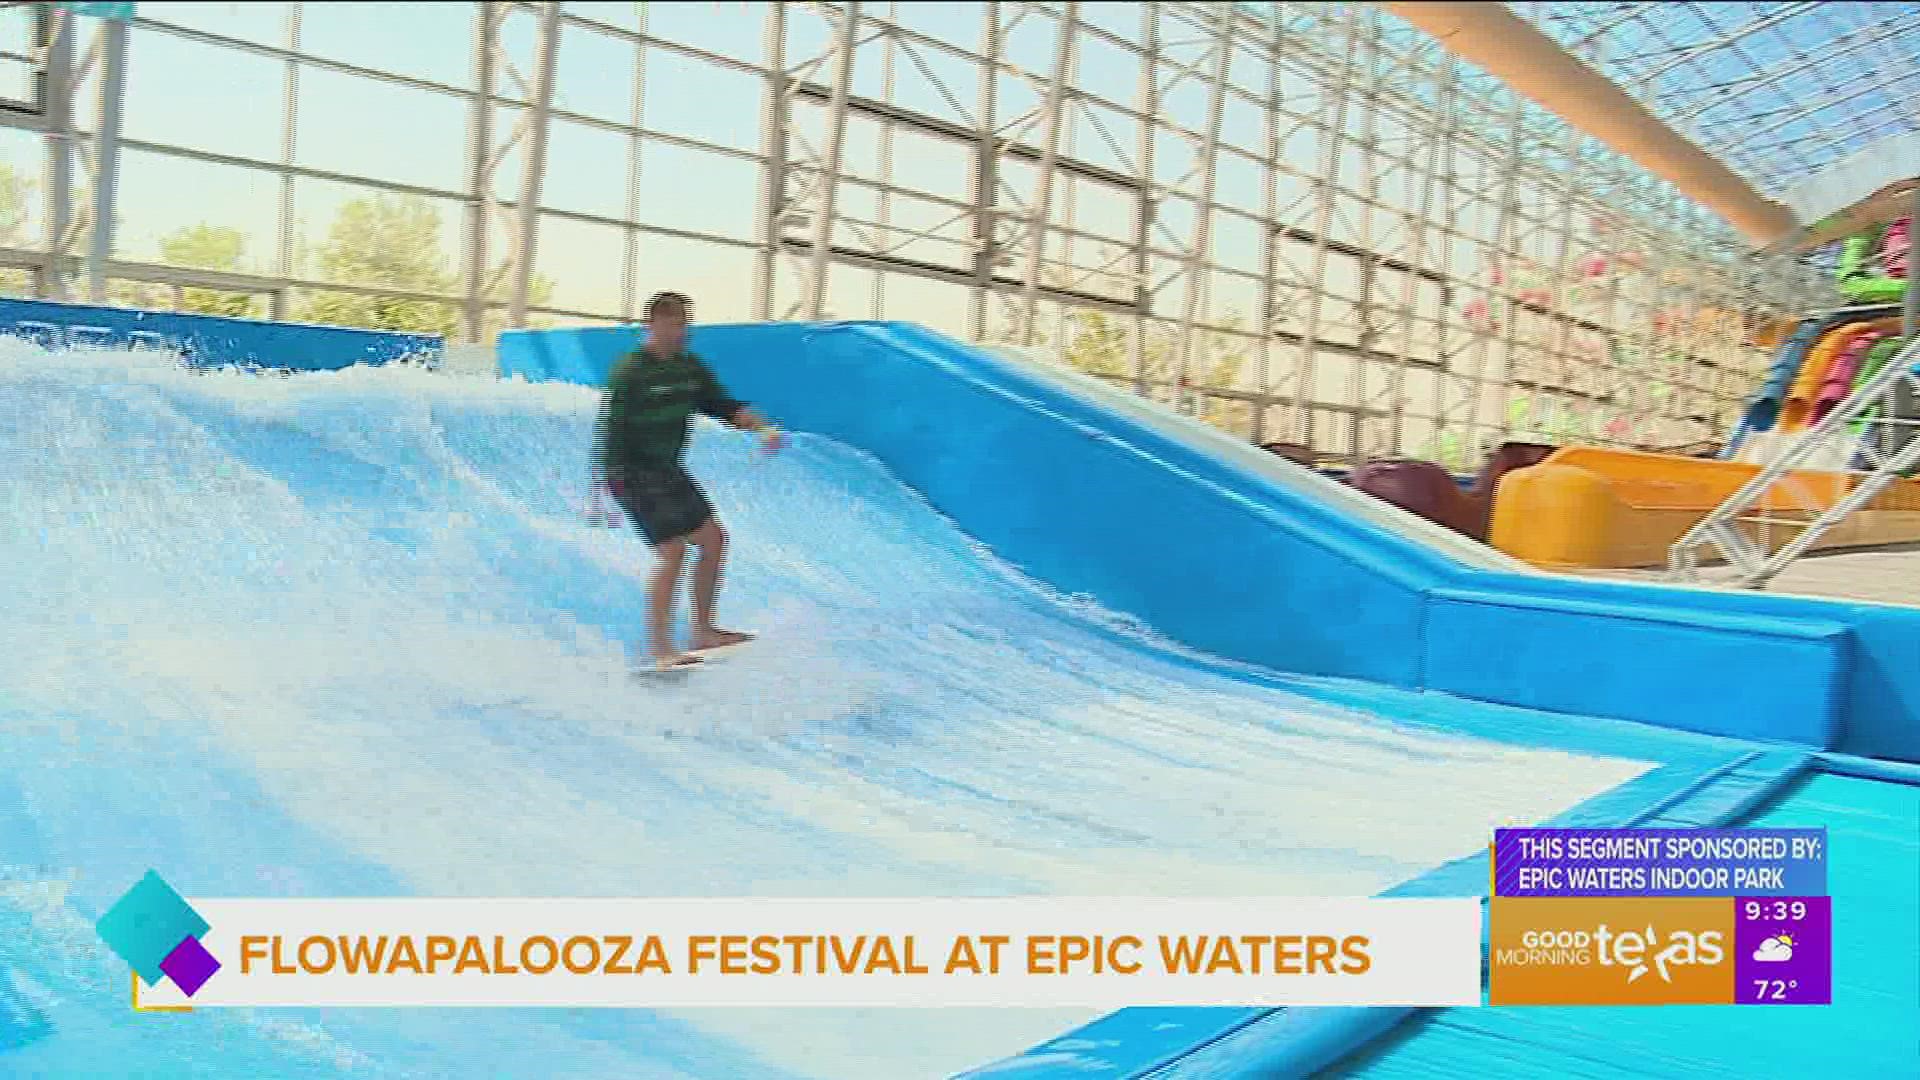 This segment is sponsored by Epic Waters Indoor Park.